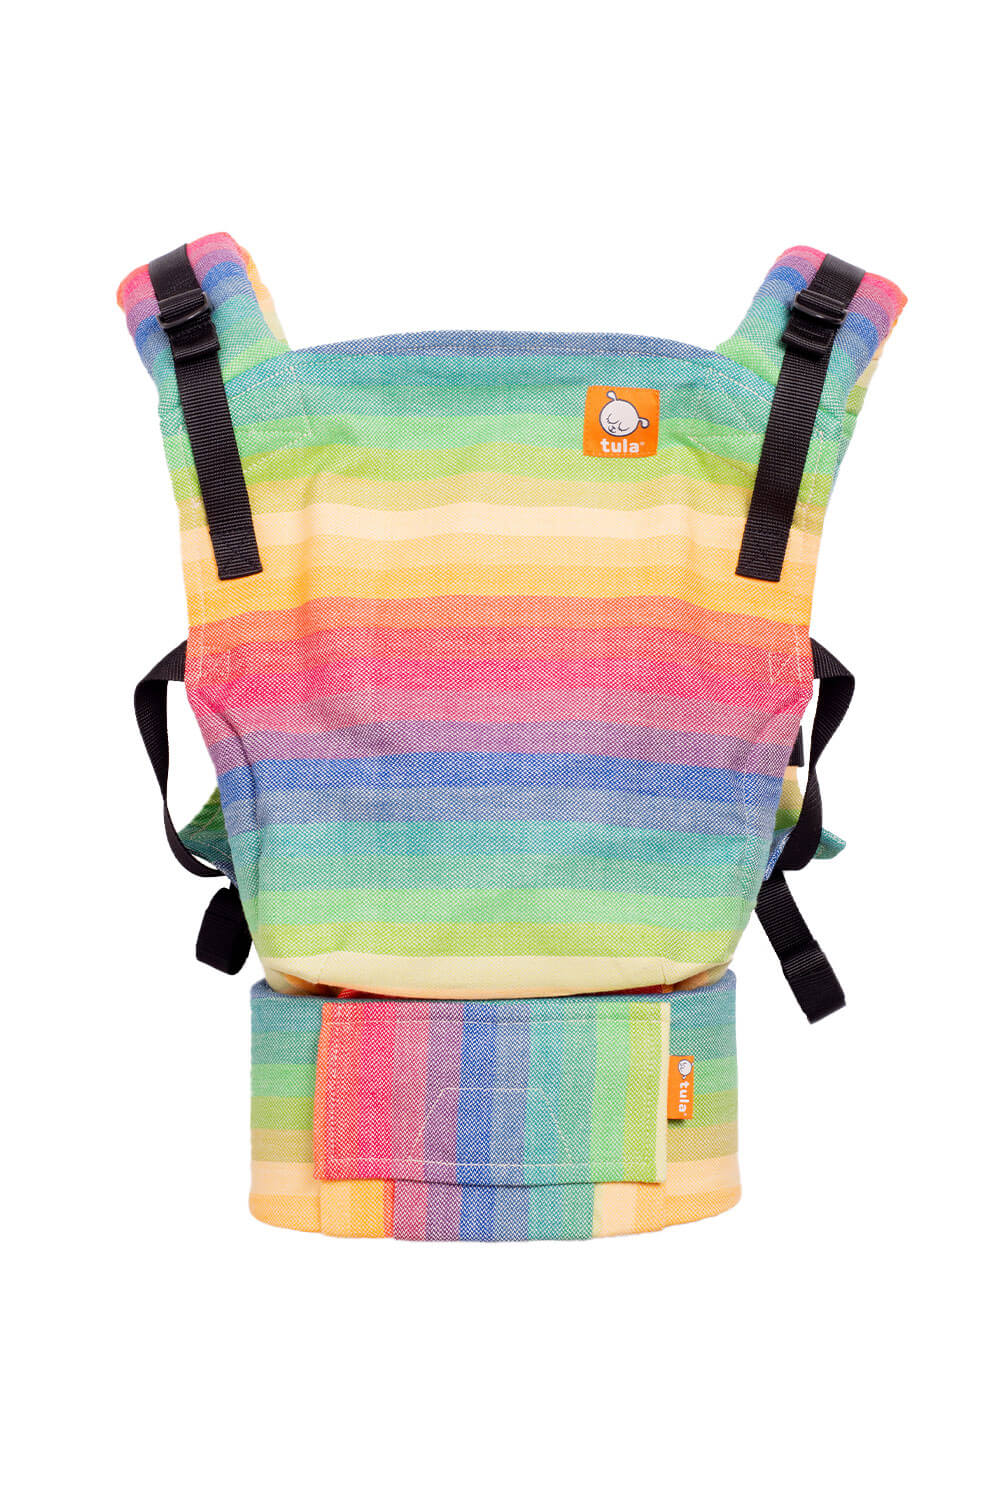 I Missed You - Signature Woven Free-to-Grow Baby Carrier